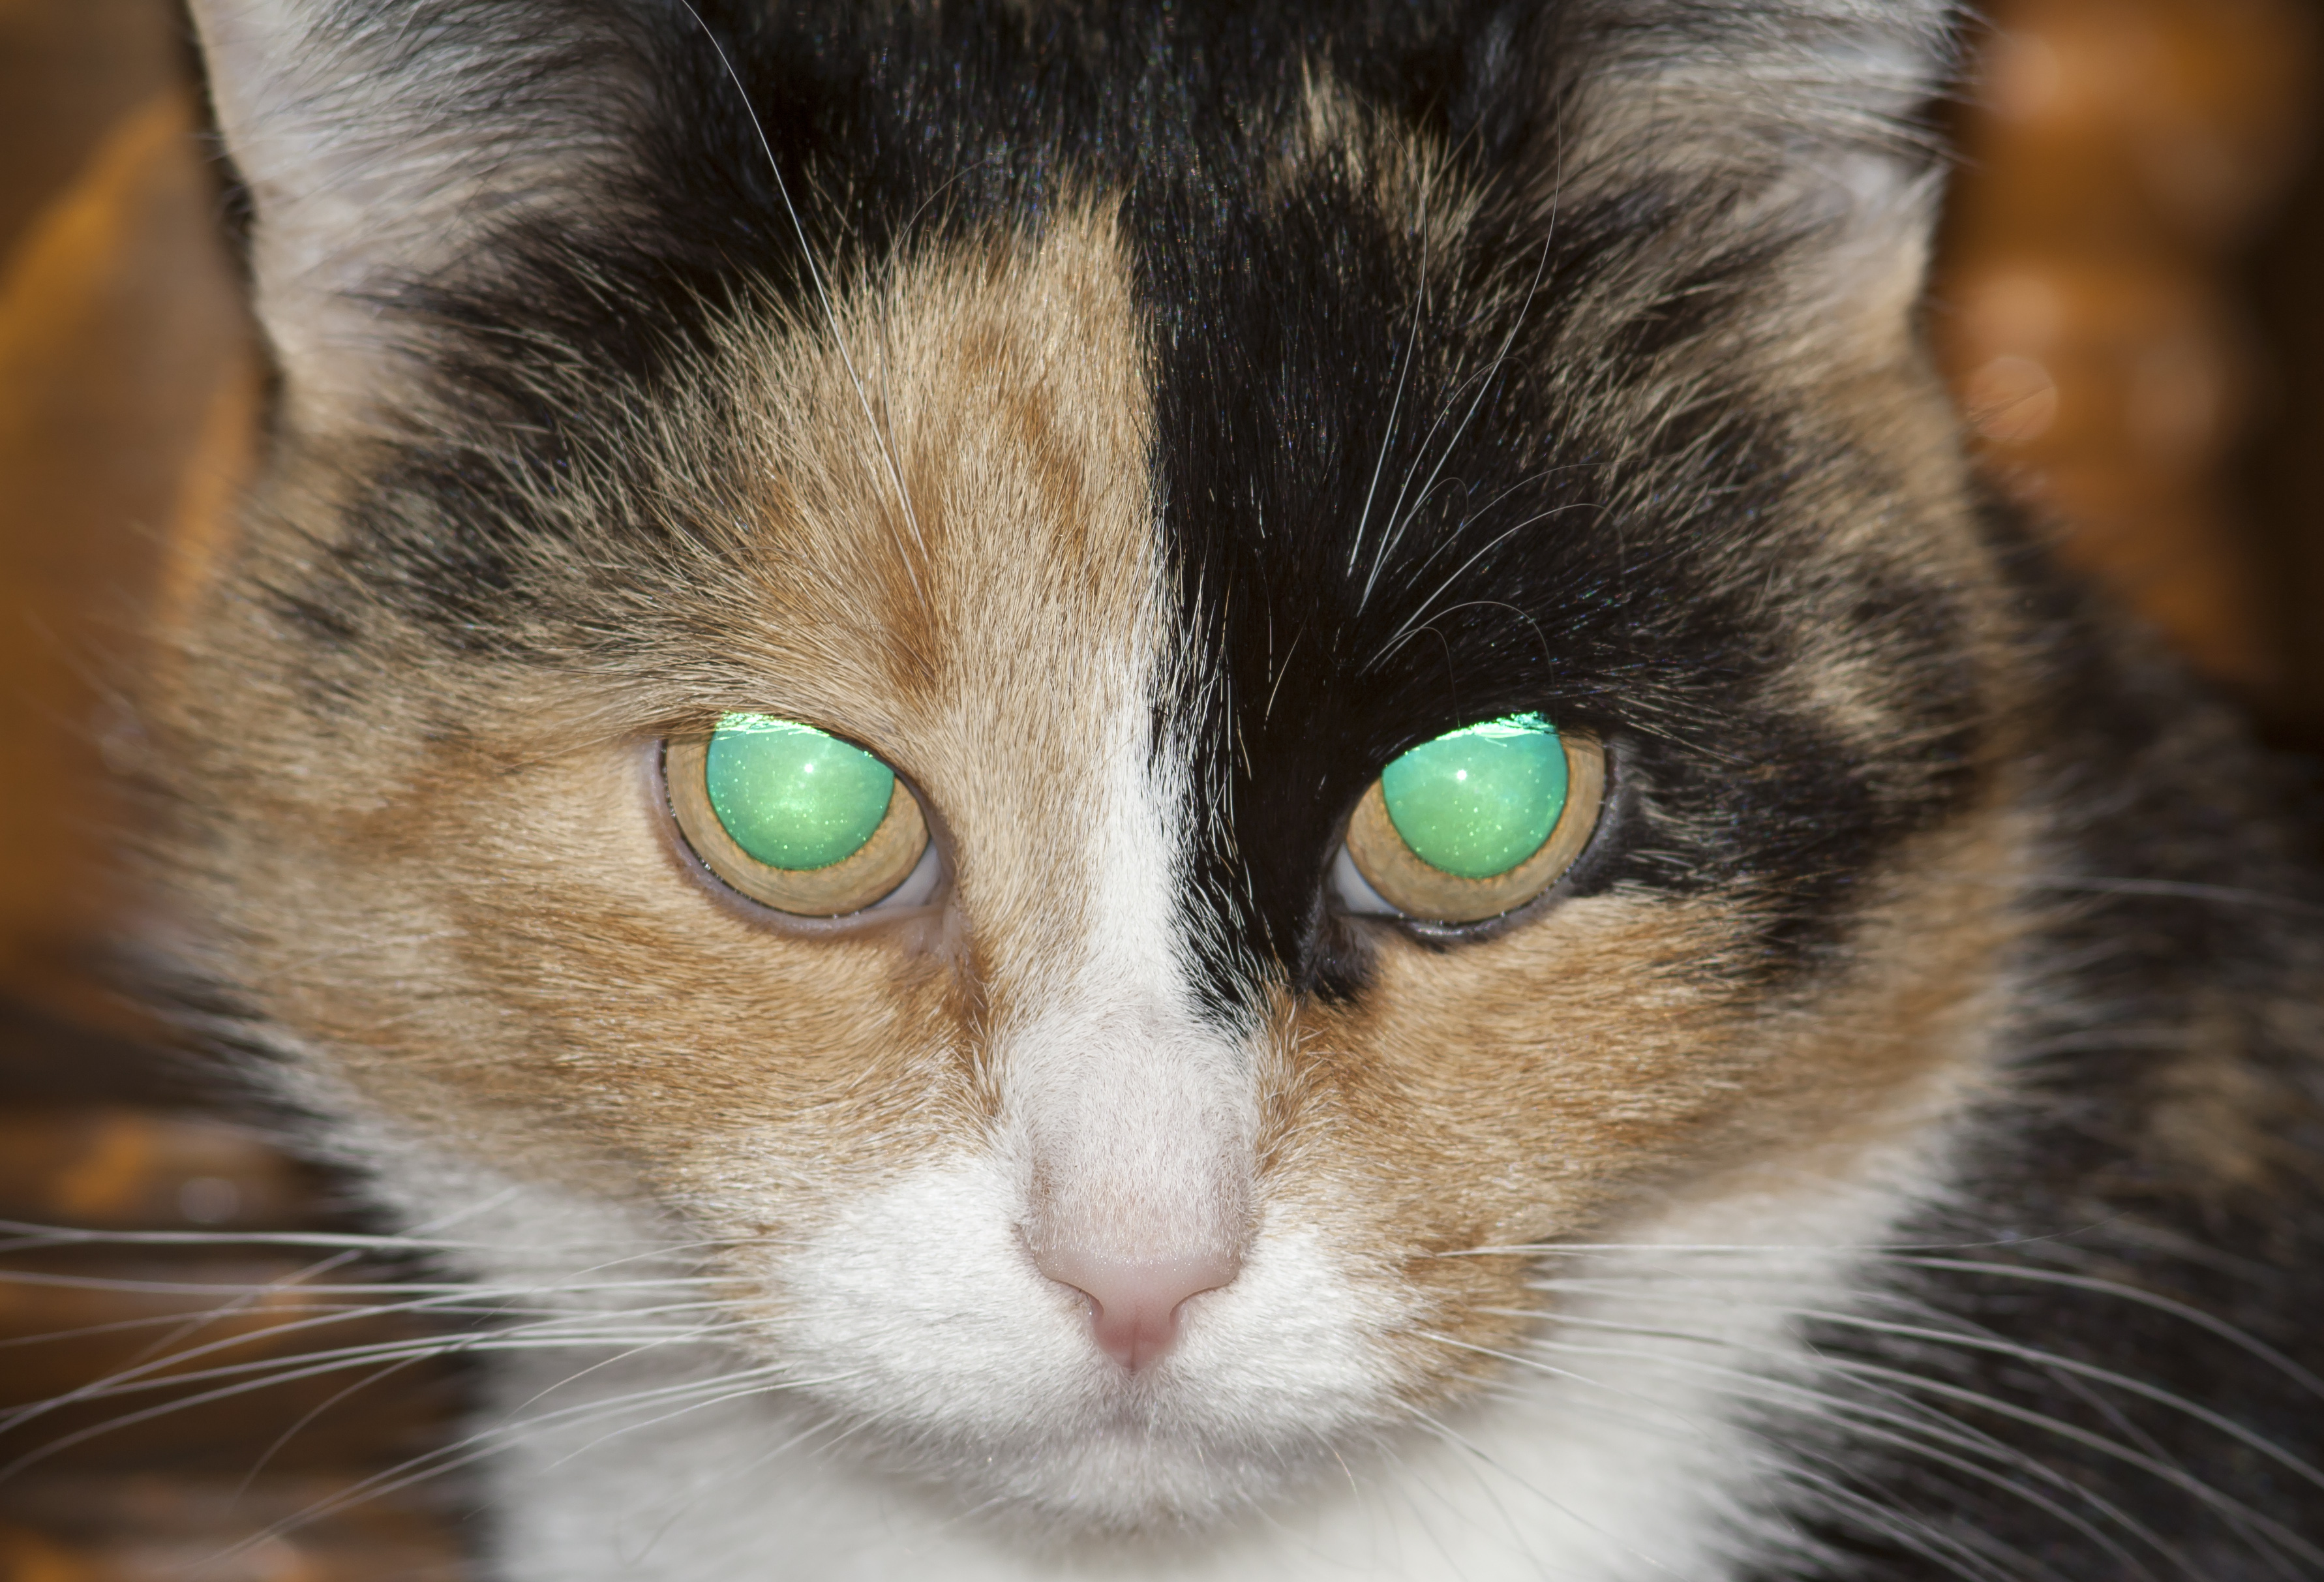 Calico cat with glowing eyes from camera flash.